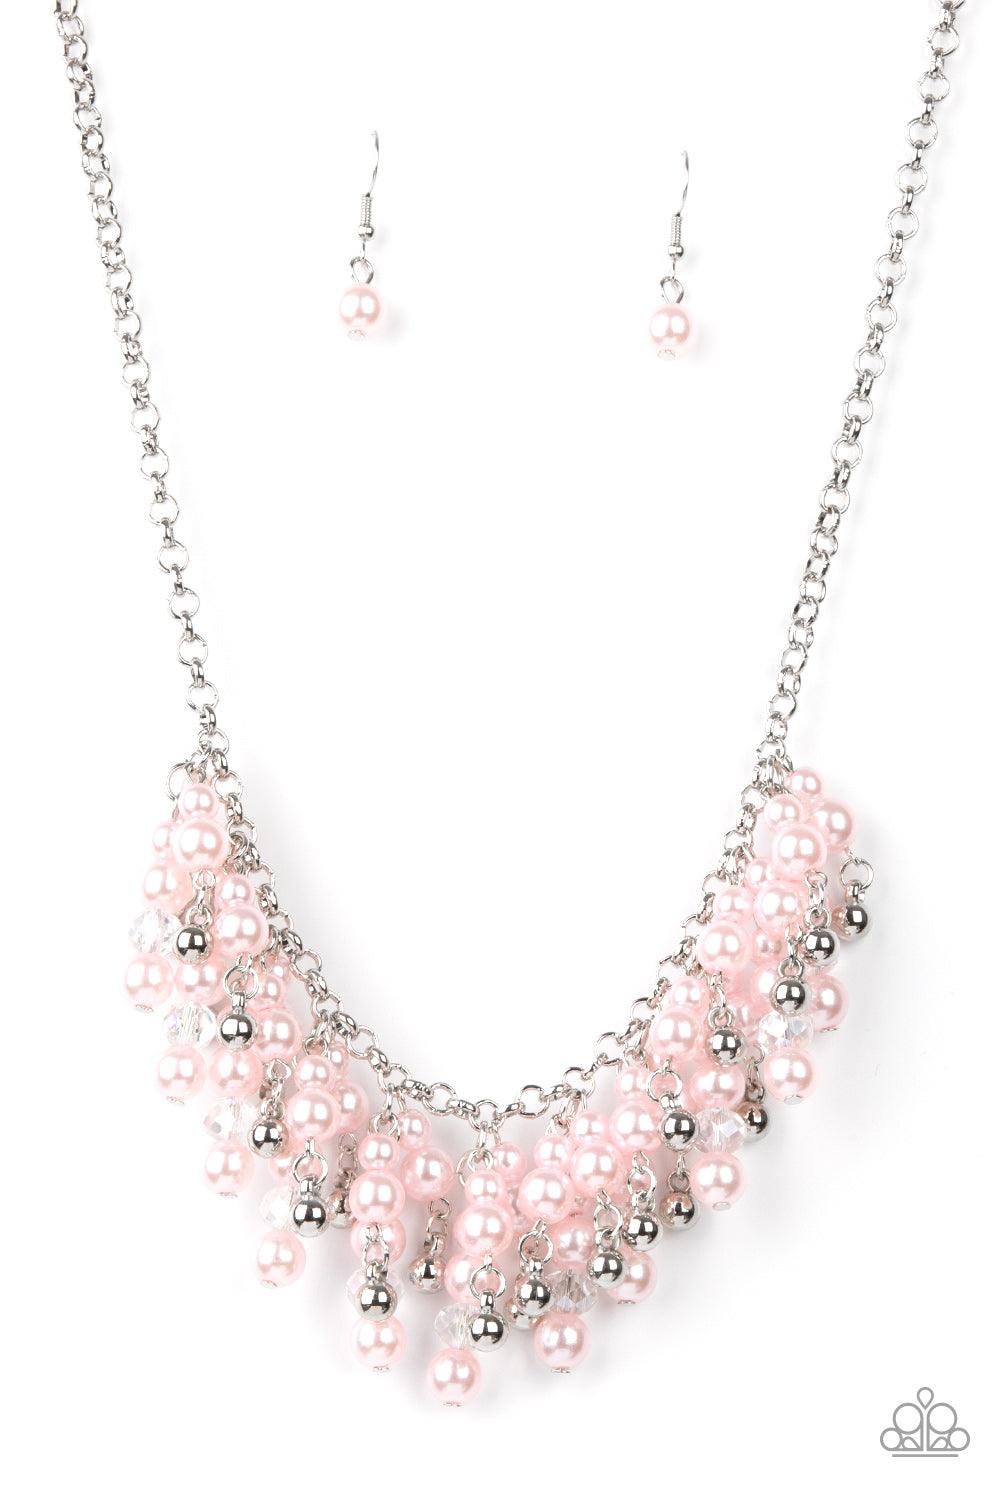 Paparazzi Accessories Champagne Dreams - Pink A bubbly collection of pink pearls, silver beads, and sparkly crystal-like beads are threaded along metallic rods that trickle from the bottom of a shimmery silver chain, creating an elegantly effervescent fri